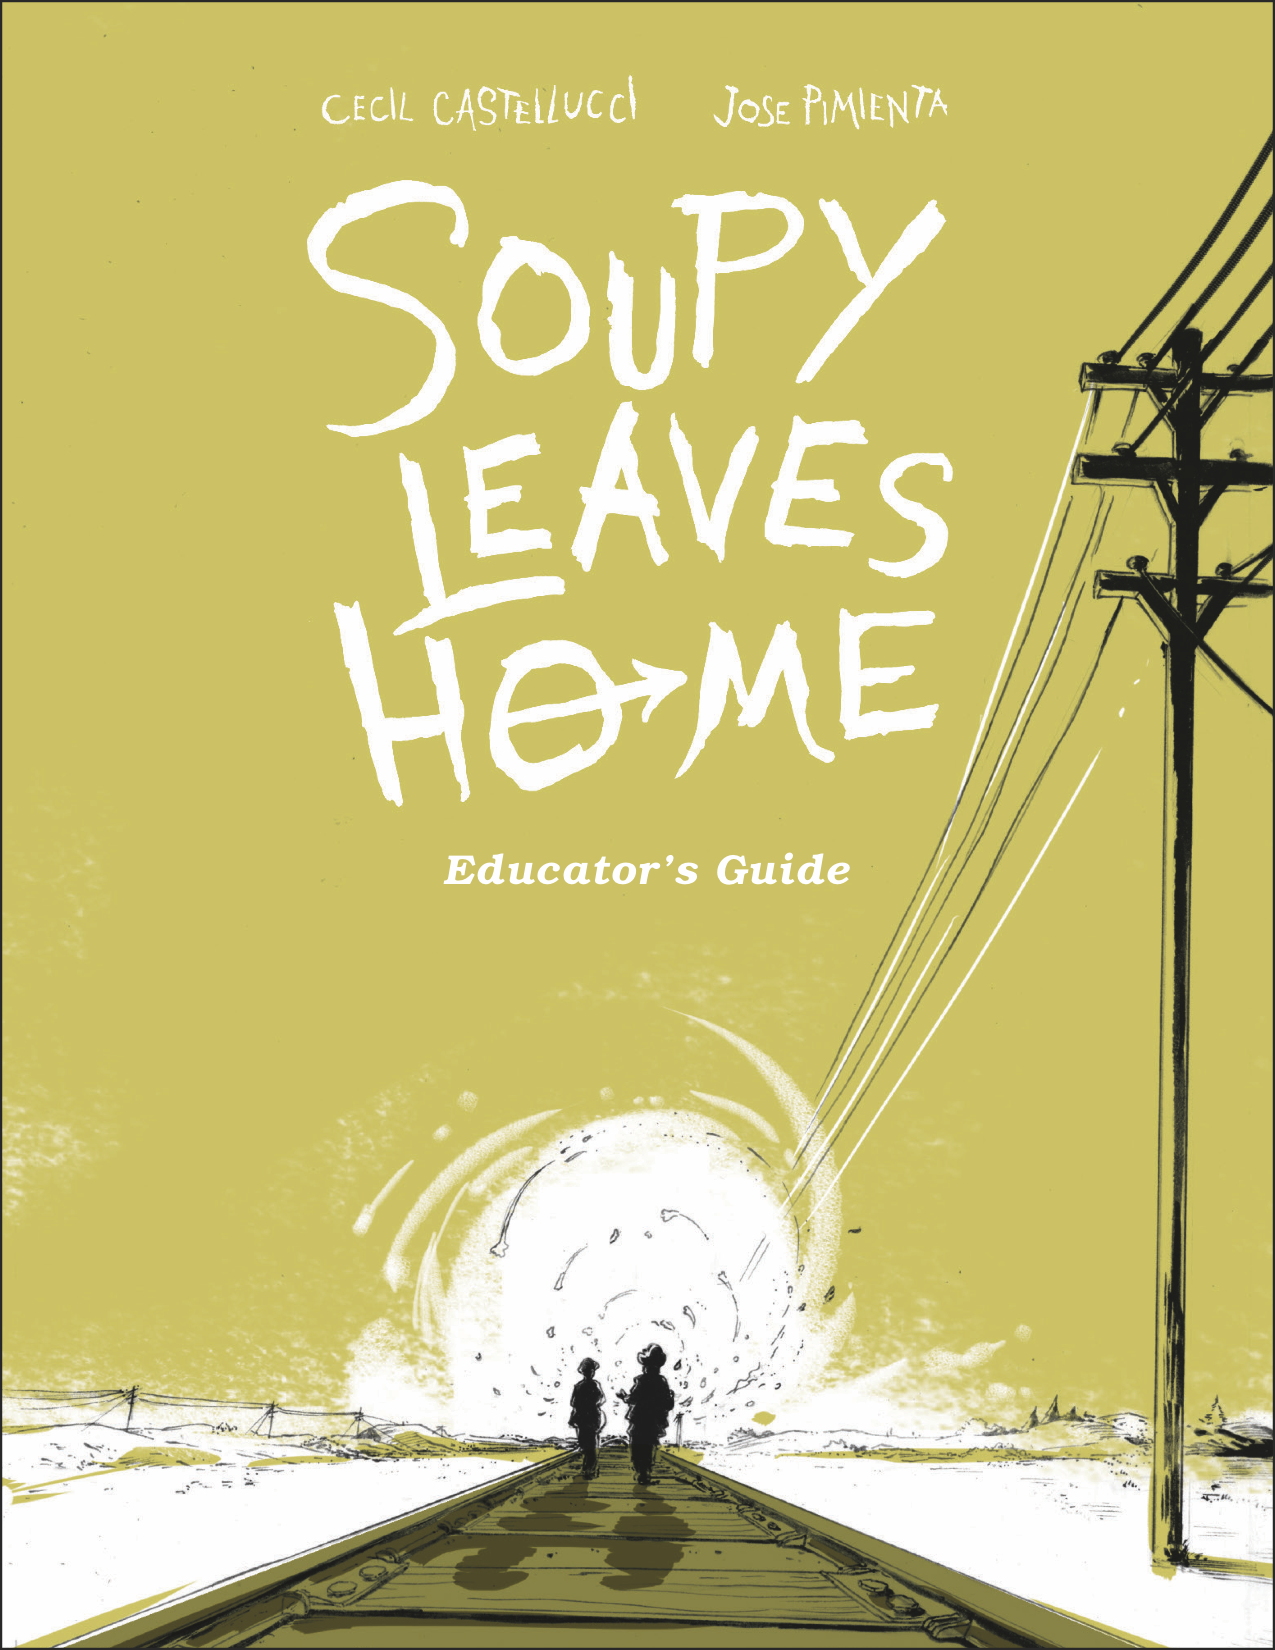 Soupy Leaves Home Educator's Guide